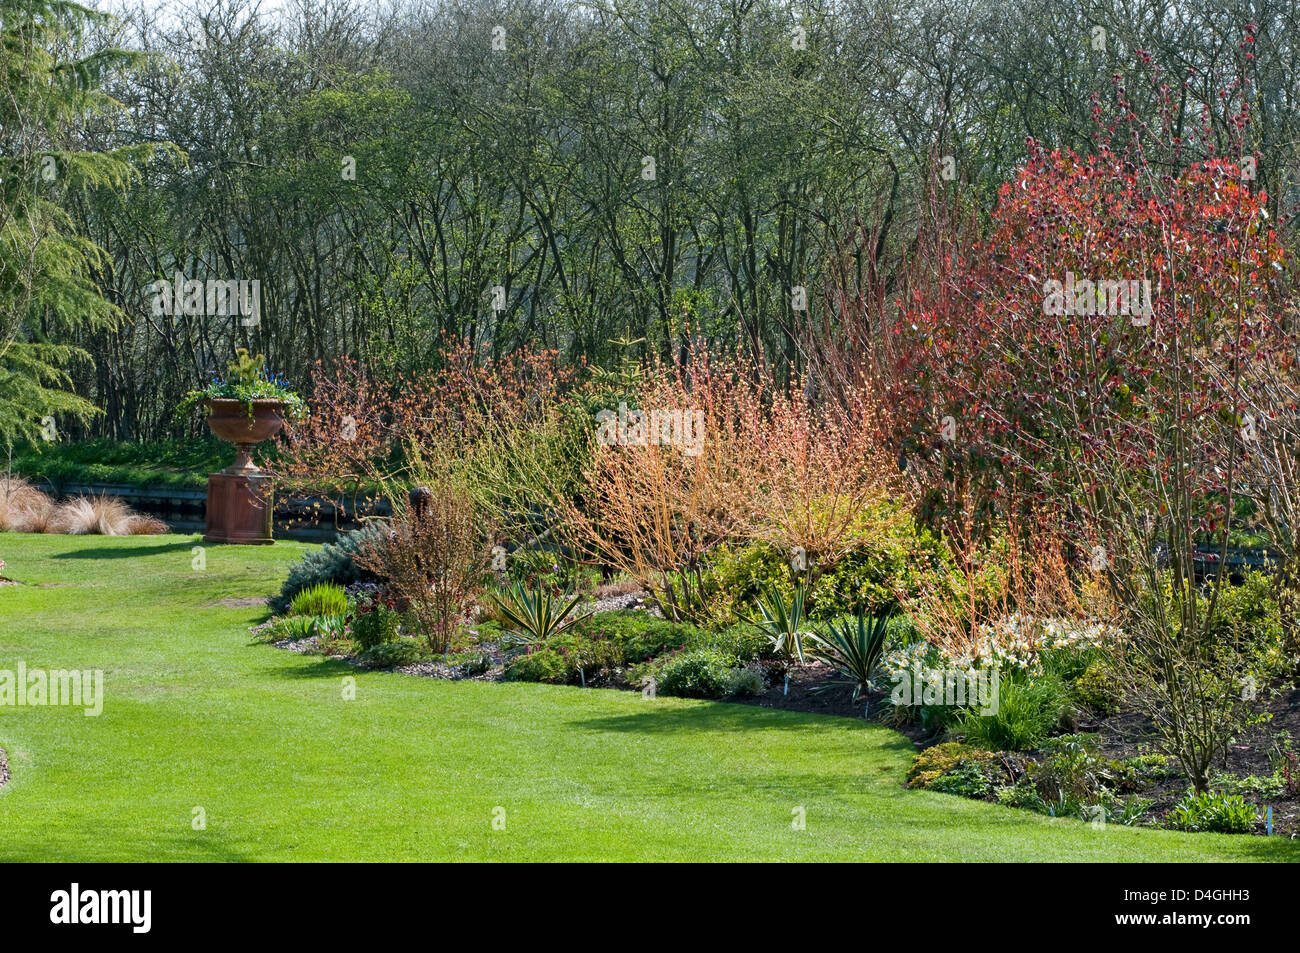 Spring Garden at Ashwood Nurseries, Kingswinford. John Massey's garden, with stem colour and new foliage in Spring. Stock Photo